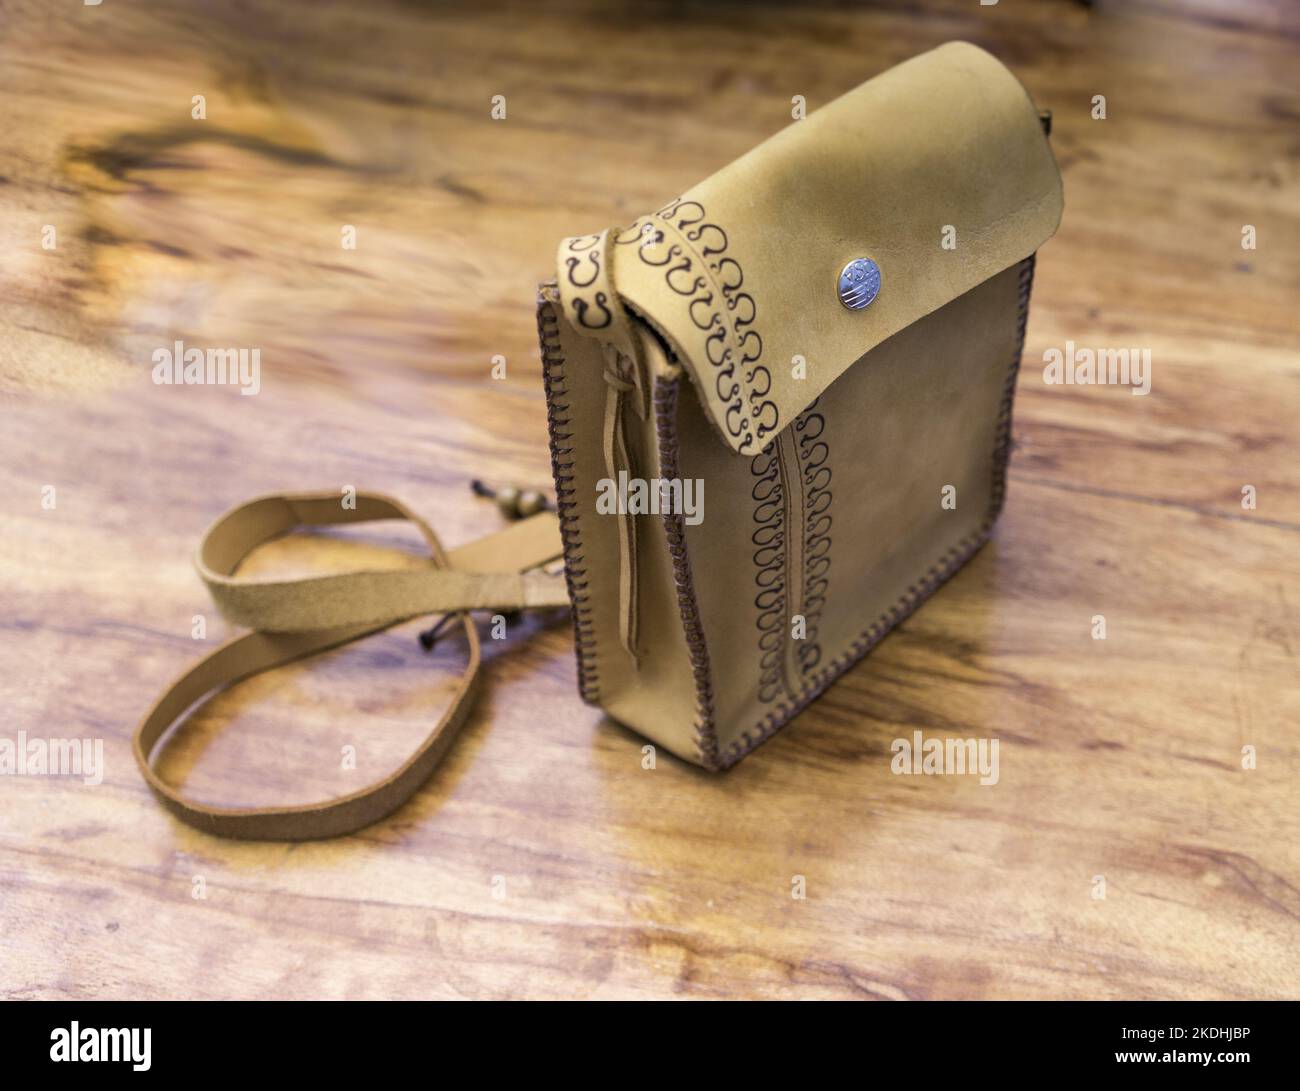 Handmade purse wtih shoulder strap coiled behind it standing upright on a wooden table. Stock Photo